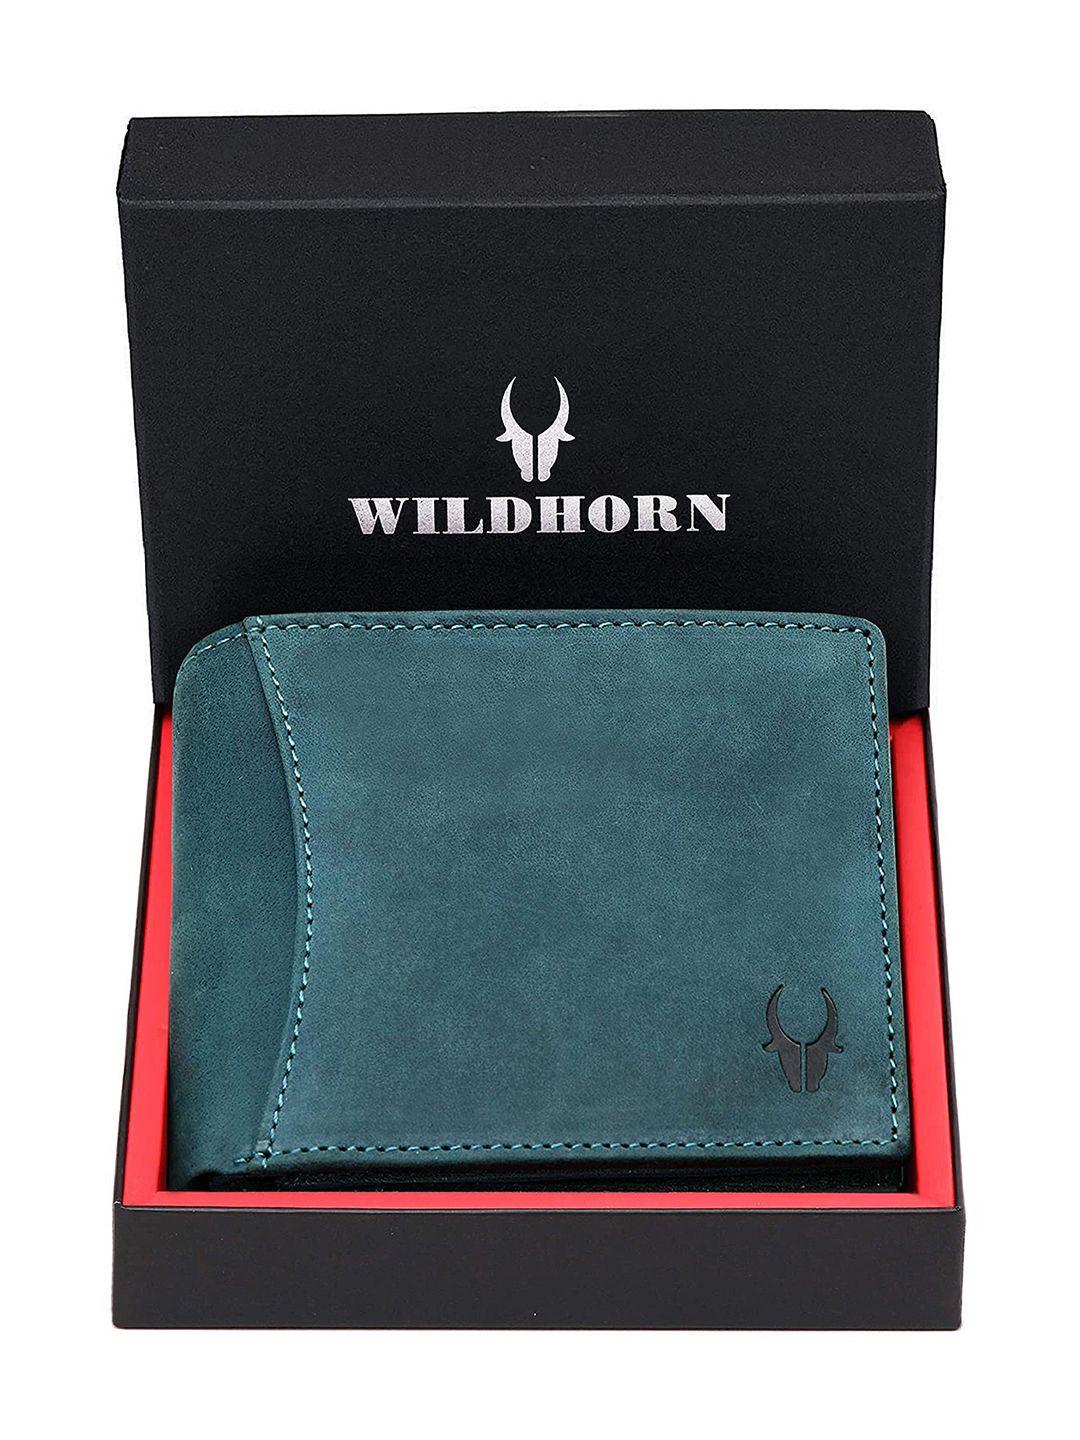 wildhorn men teal solid rfid protected leather two fold wallet